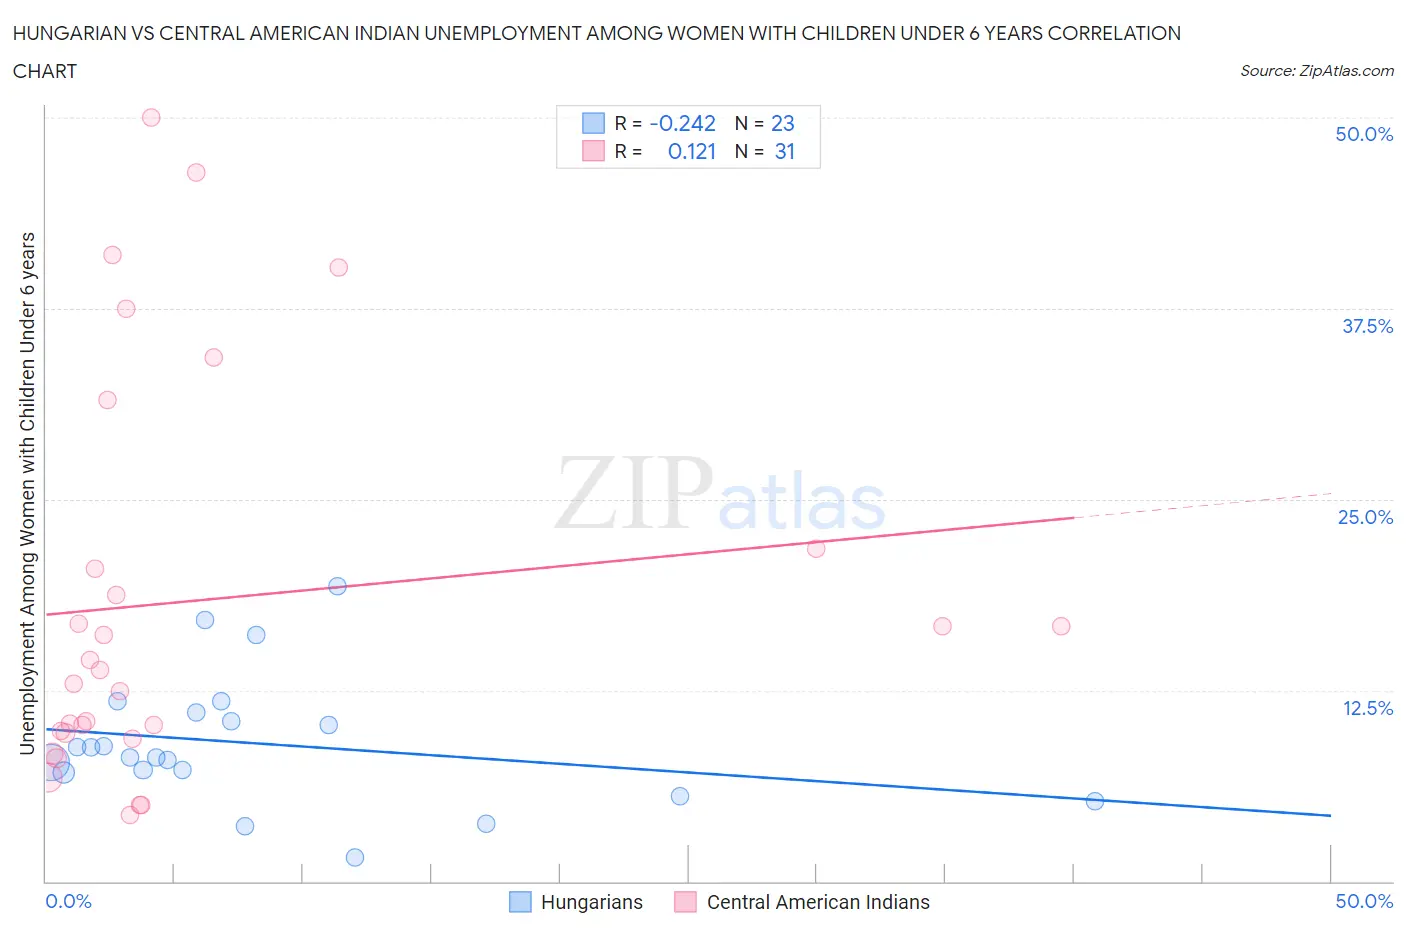 Hungarian vs Central American Indian Unemployment Among Women with Children Under 6 years